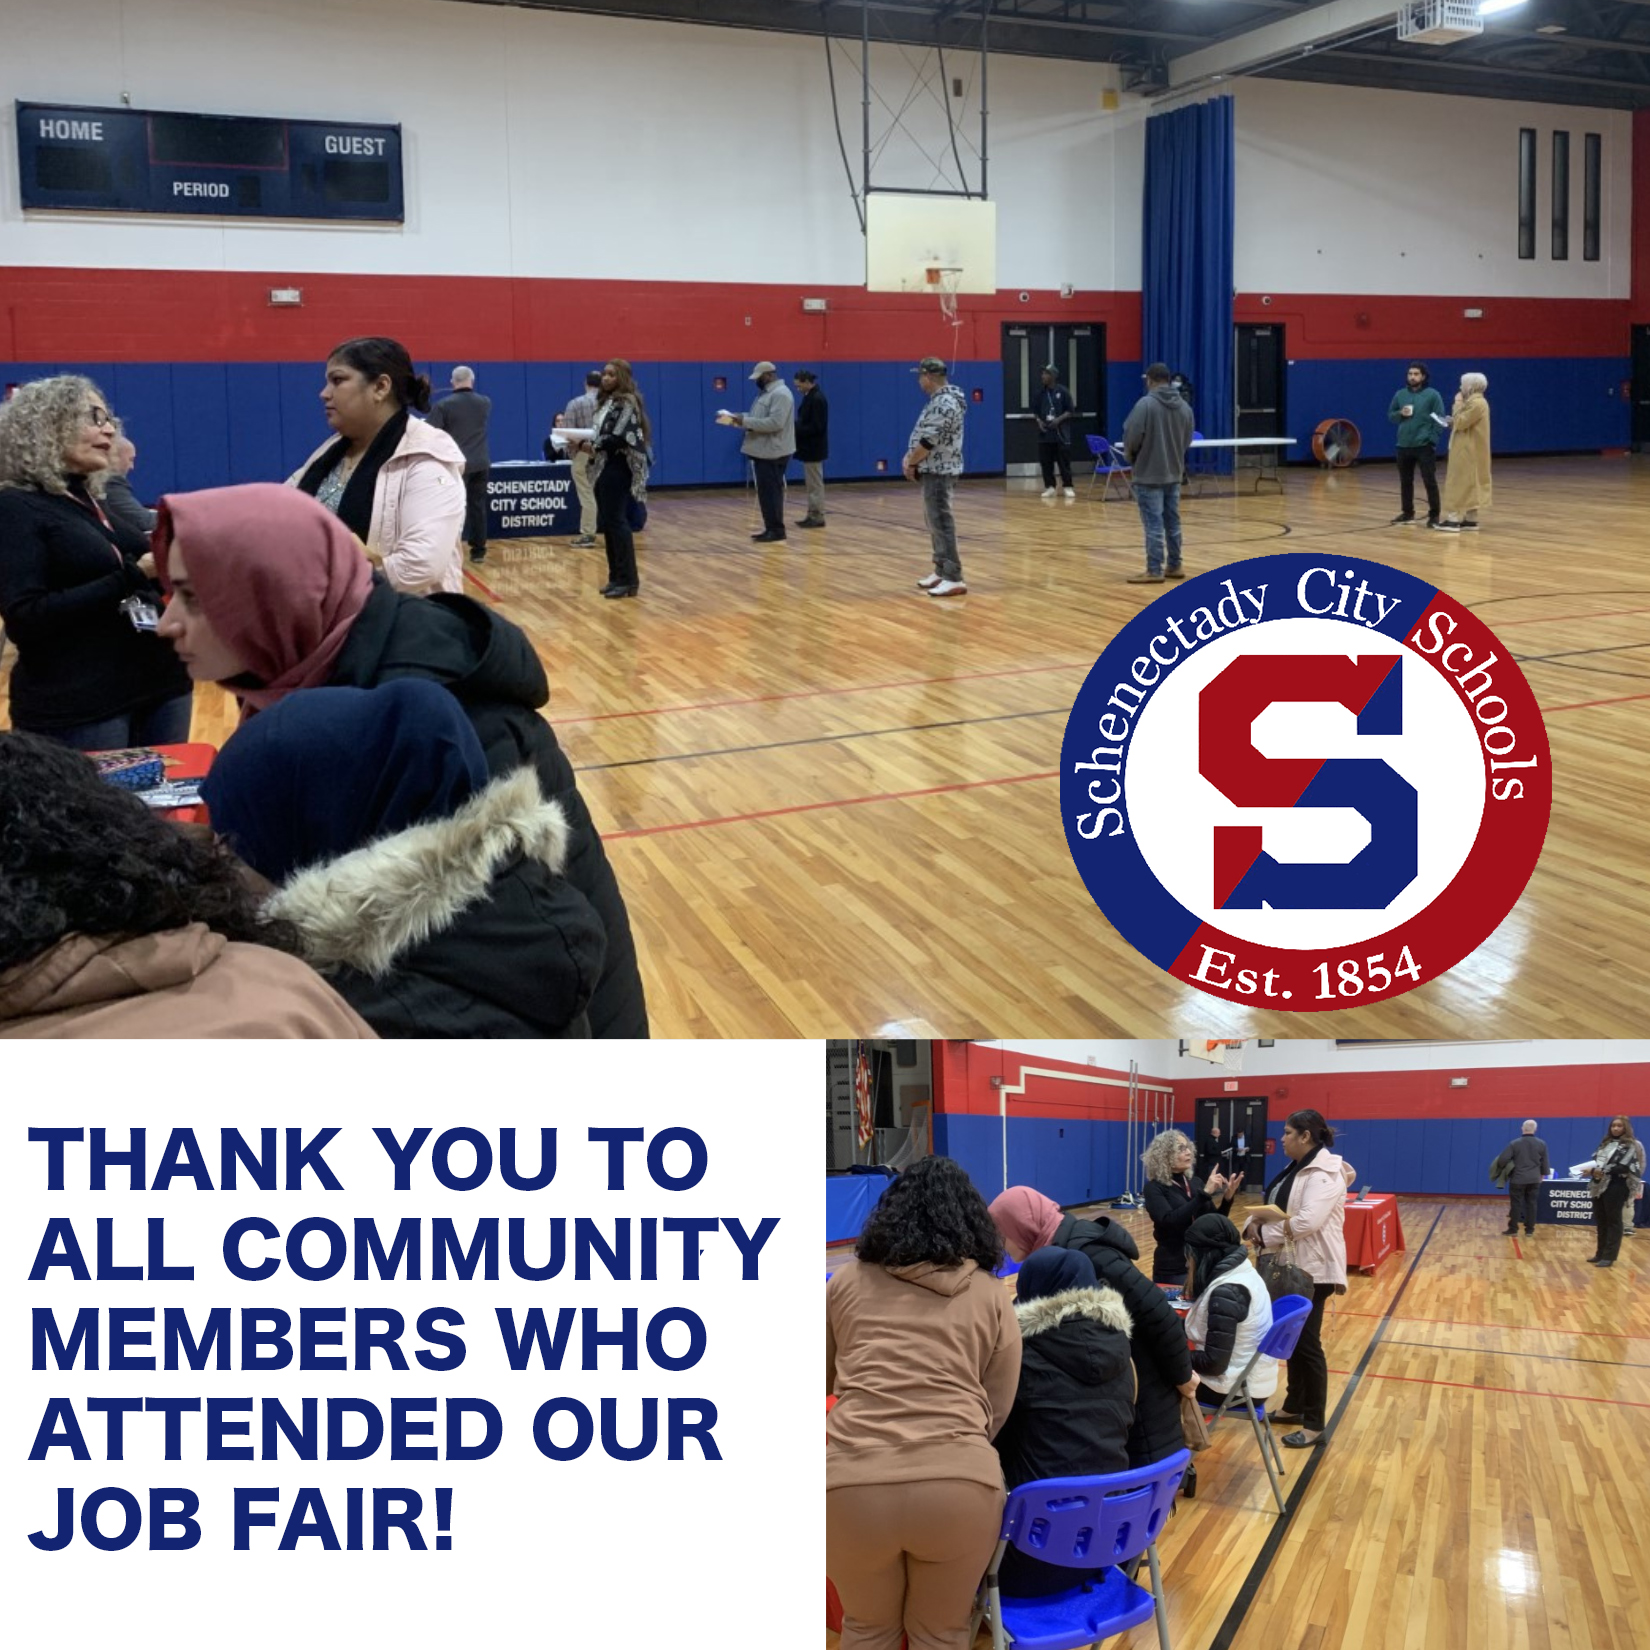 Thank you to all who attended our job fair